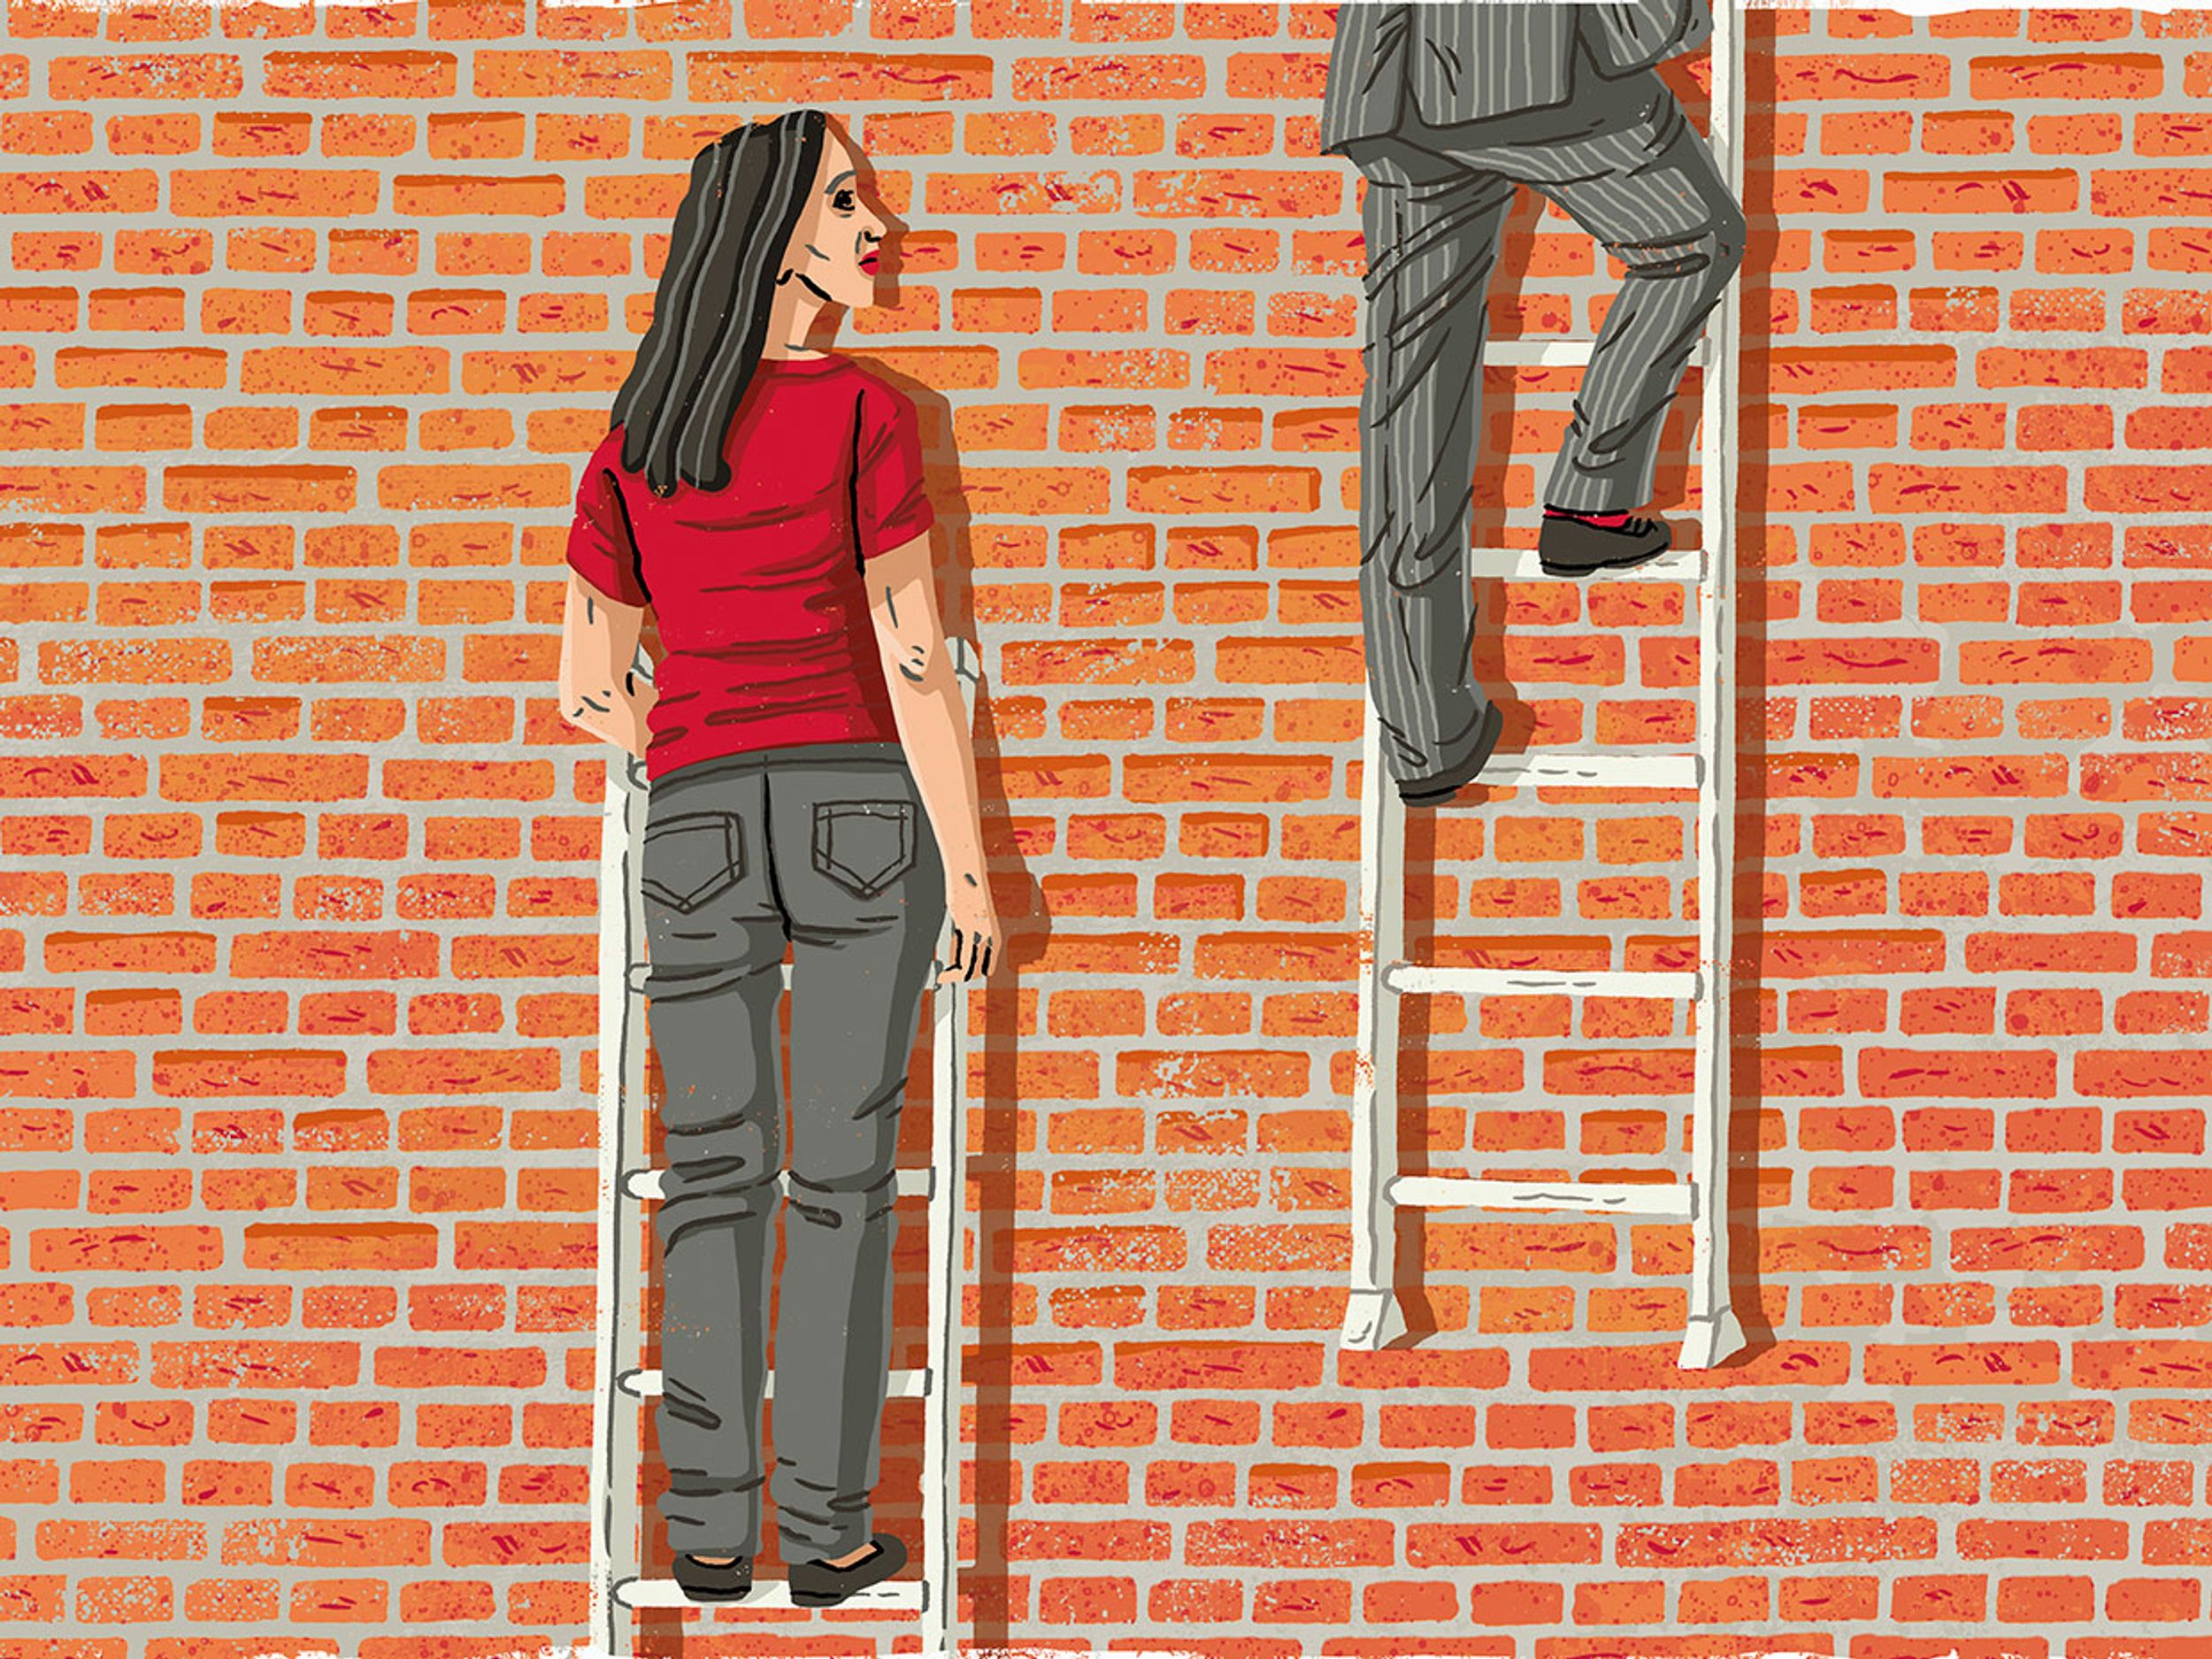 Illustration of a woman who cannot climb a ladder that goes no further, while a man climbs a ladder that extends high up.